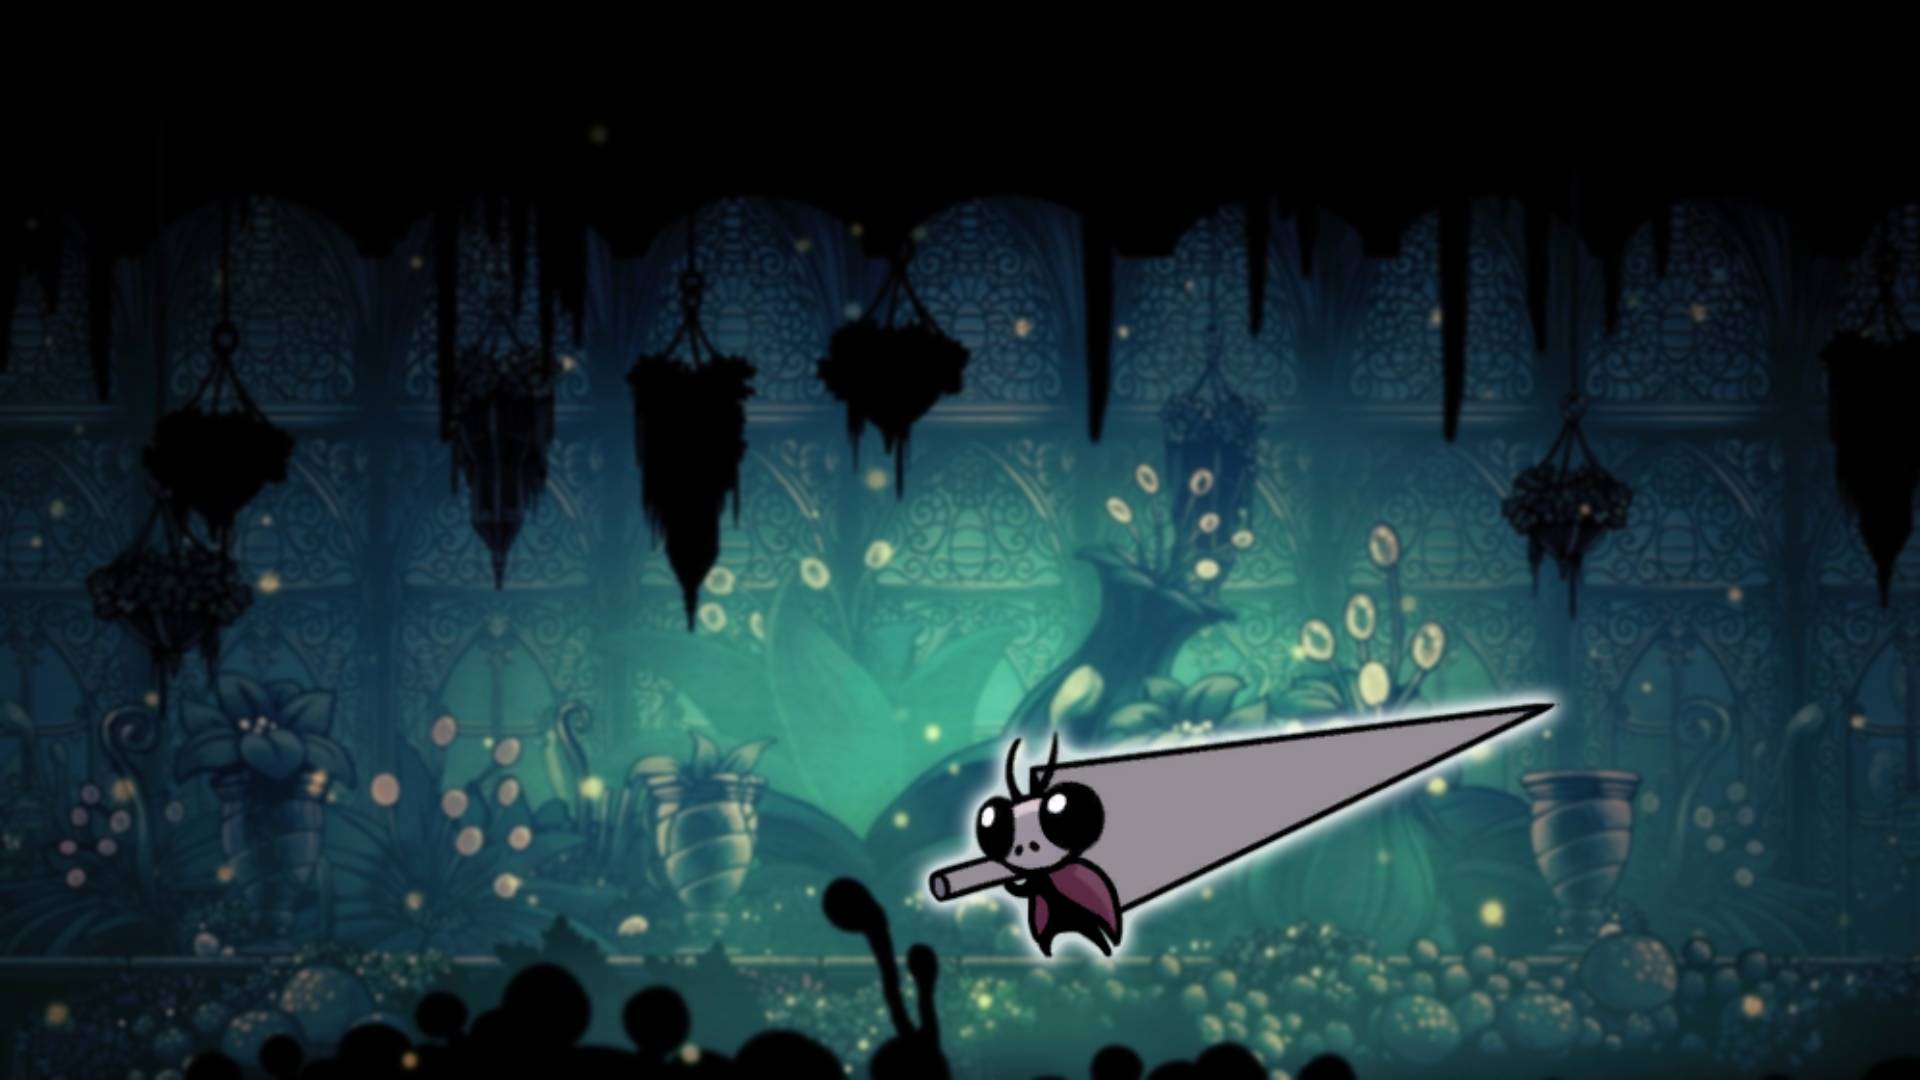 Great Nailsage Sly - the Hollow Knight boss, is visible against a mossy green background area from Hollow Knight 